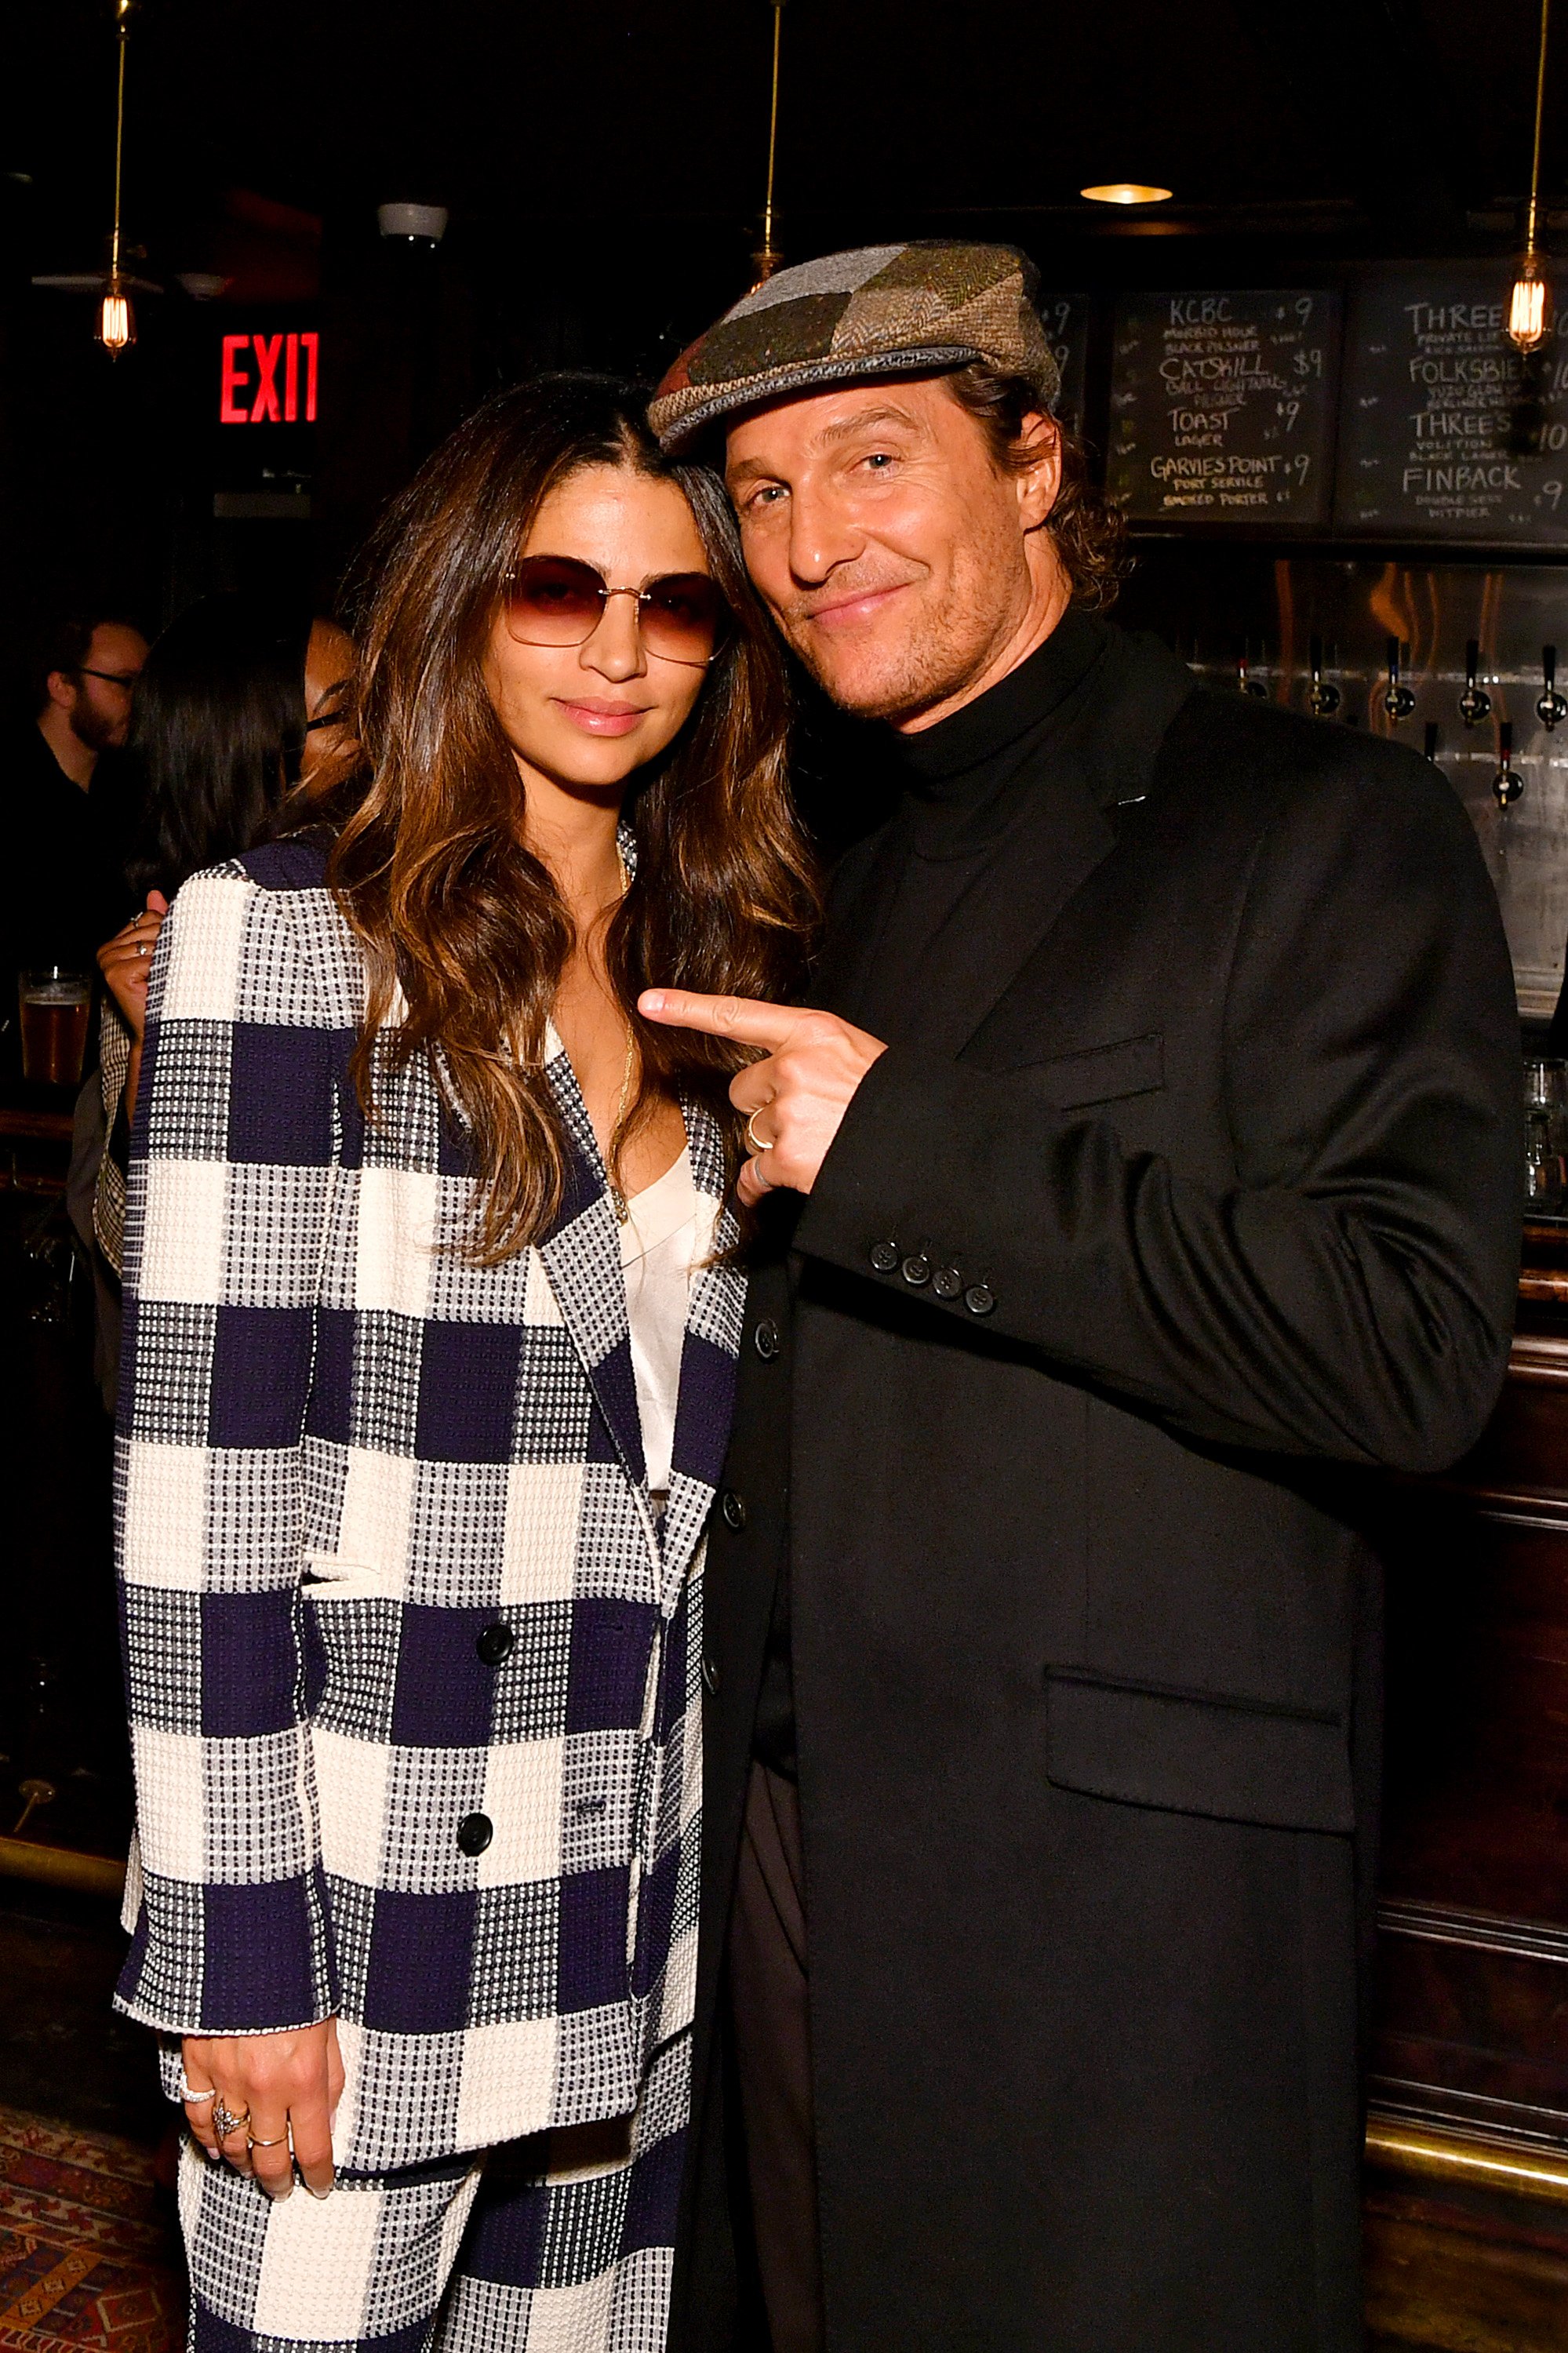 Camila Alves and Matthew McConaughey at a screening of "The Gentlemen" on January 11, 2020 in New York City. | Source: Getty Images